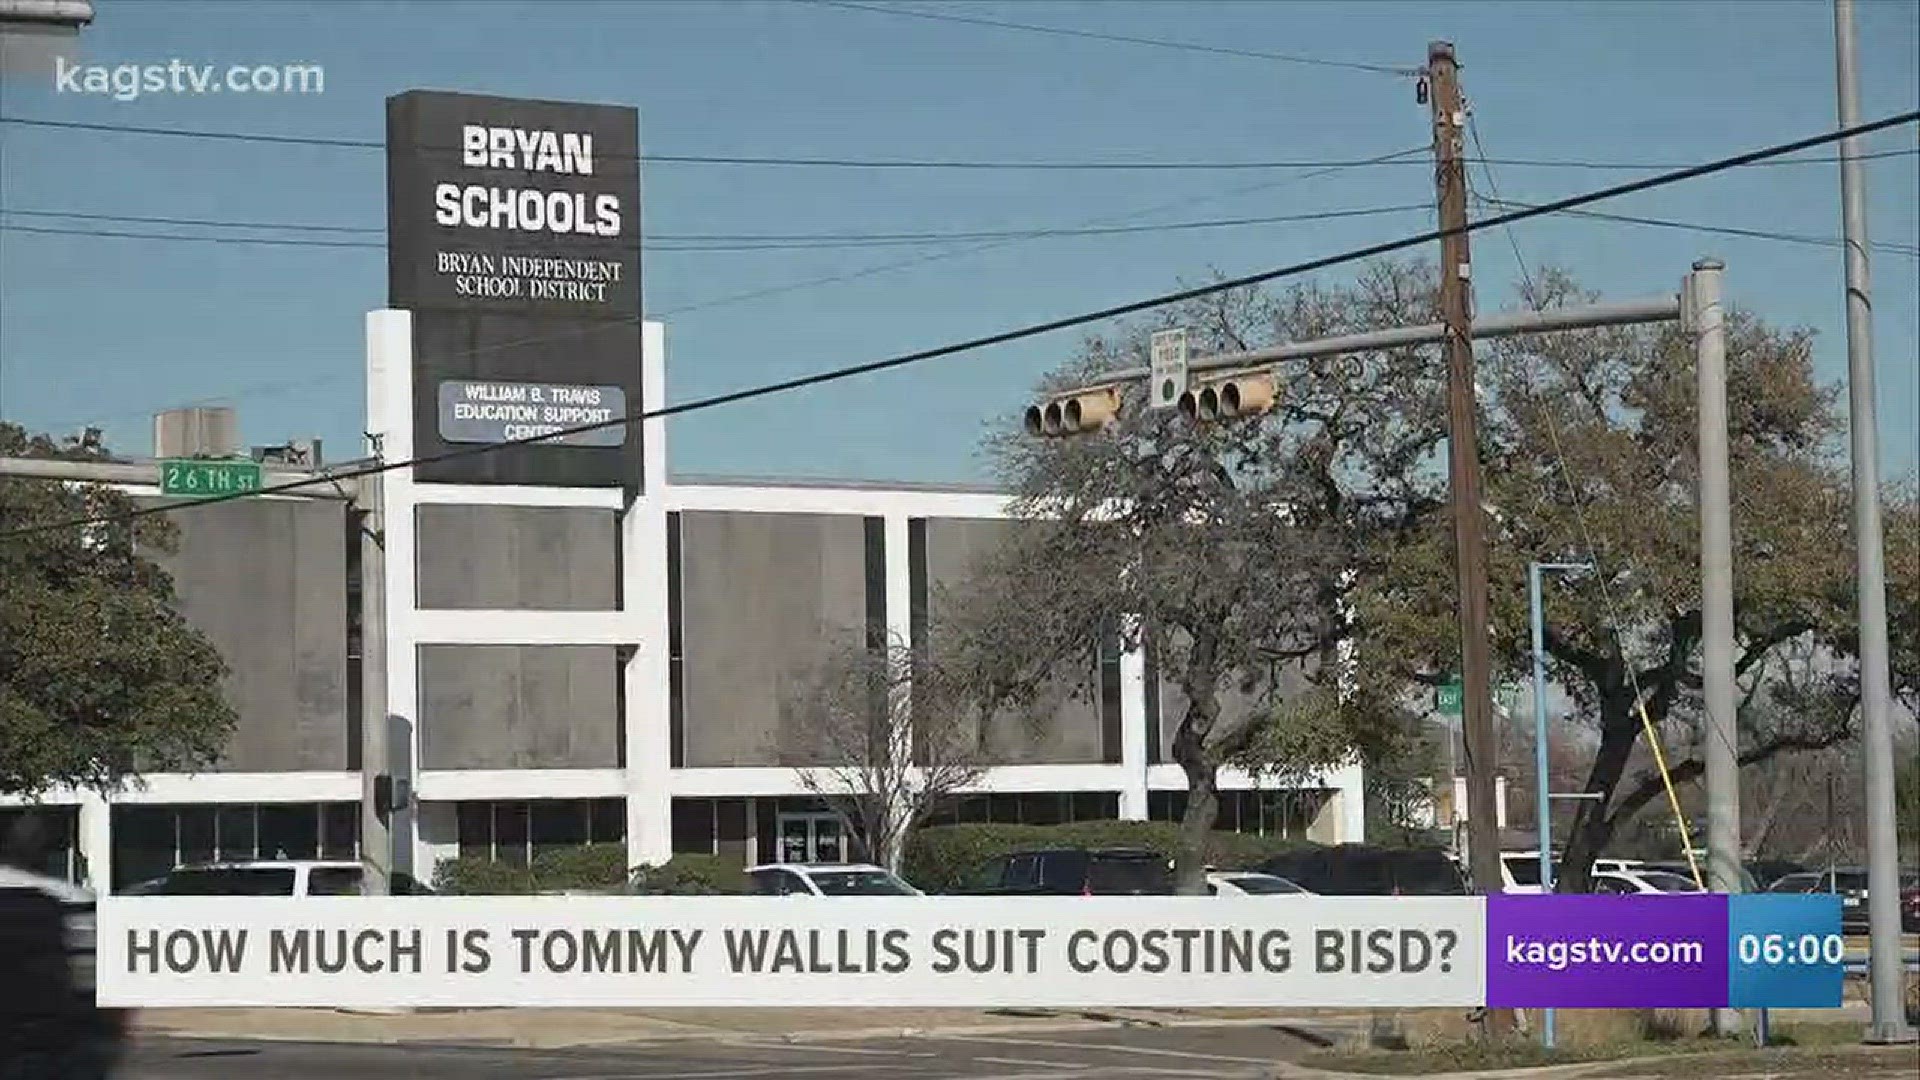 The legal drama surrounding the resignation of former BISD superintendent Tommy Wallis has been one of the most talked about stories from over the past year. While you have most likely heard about it, what you may not know is how much going to court has c